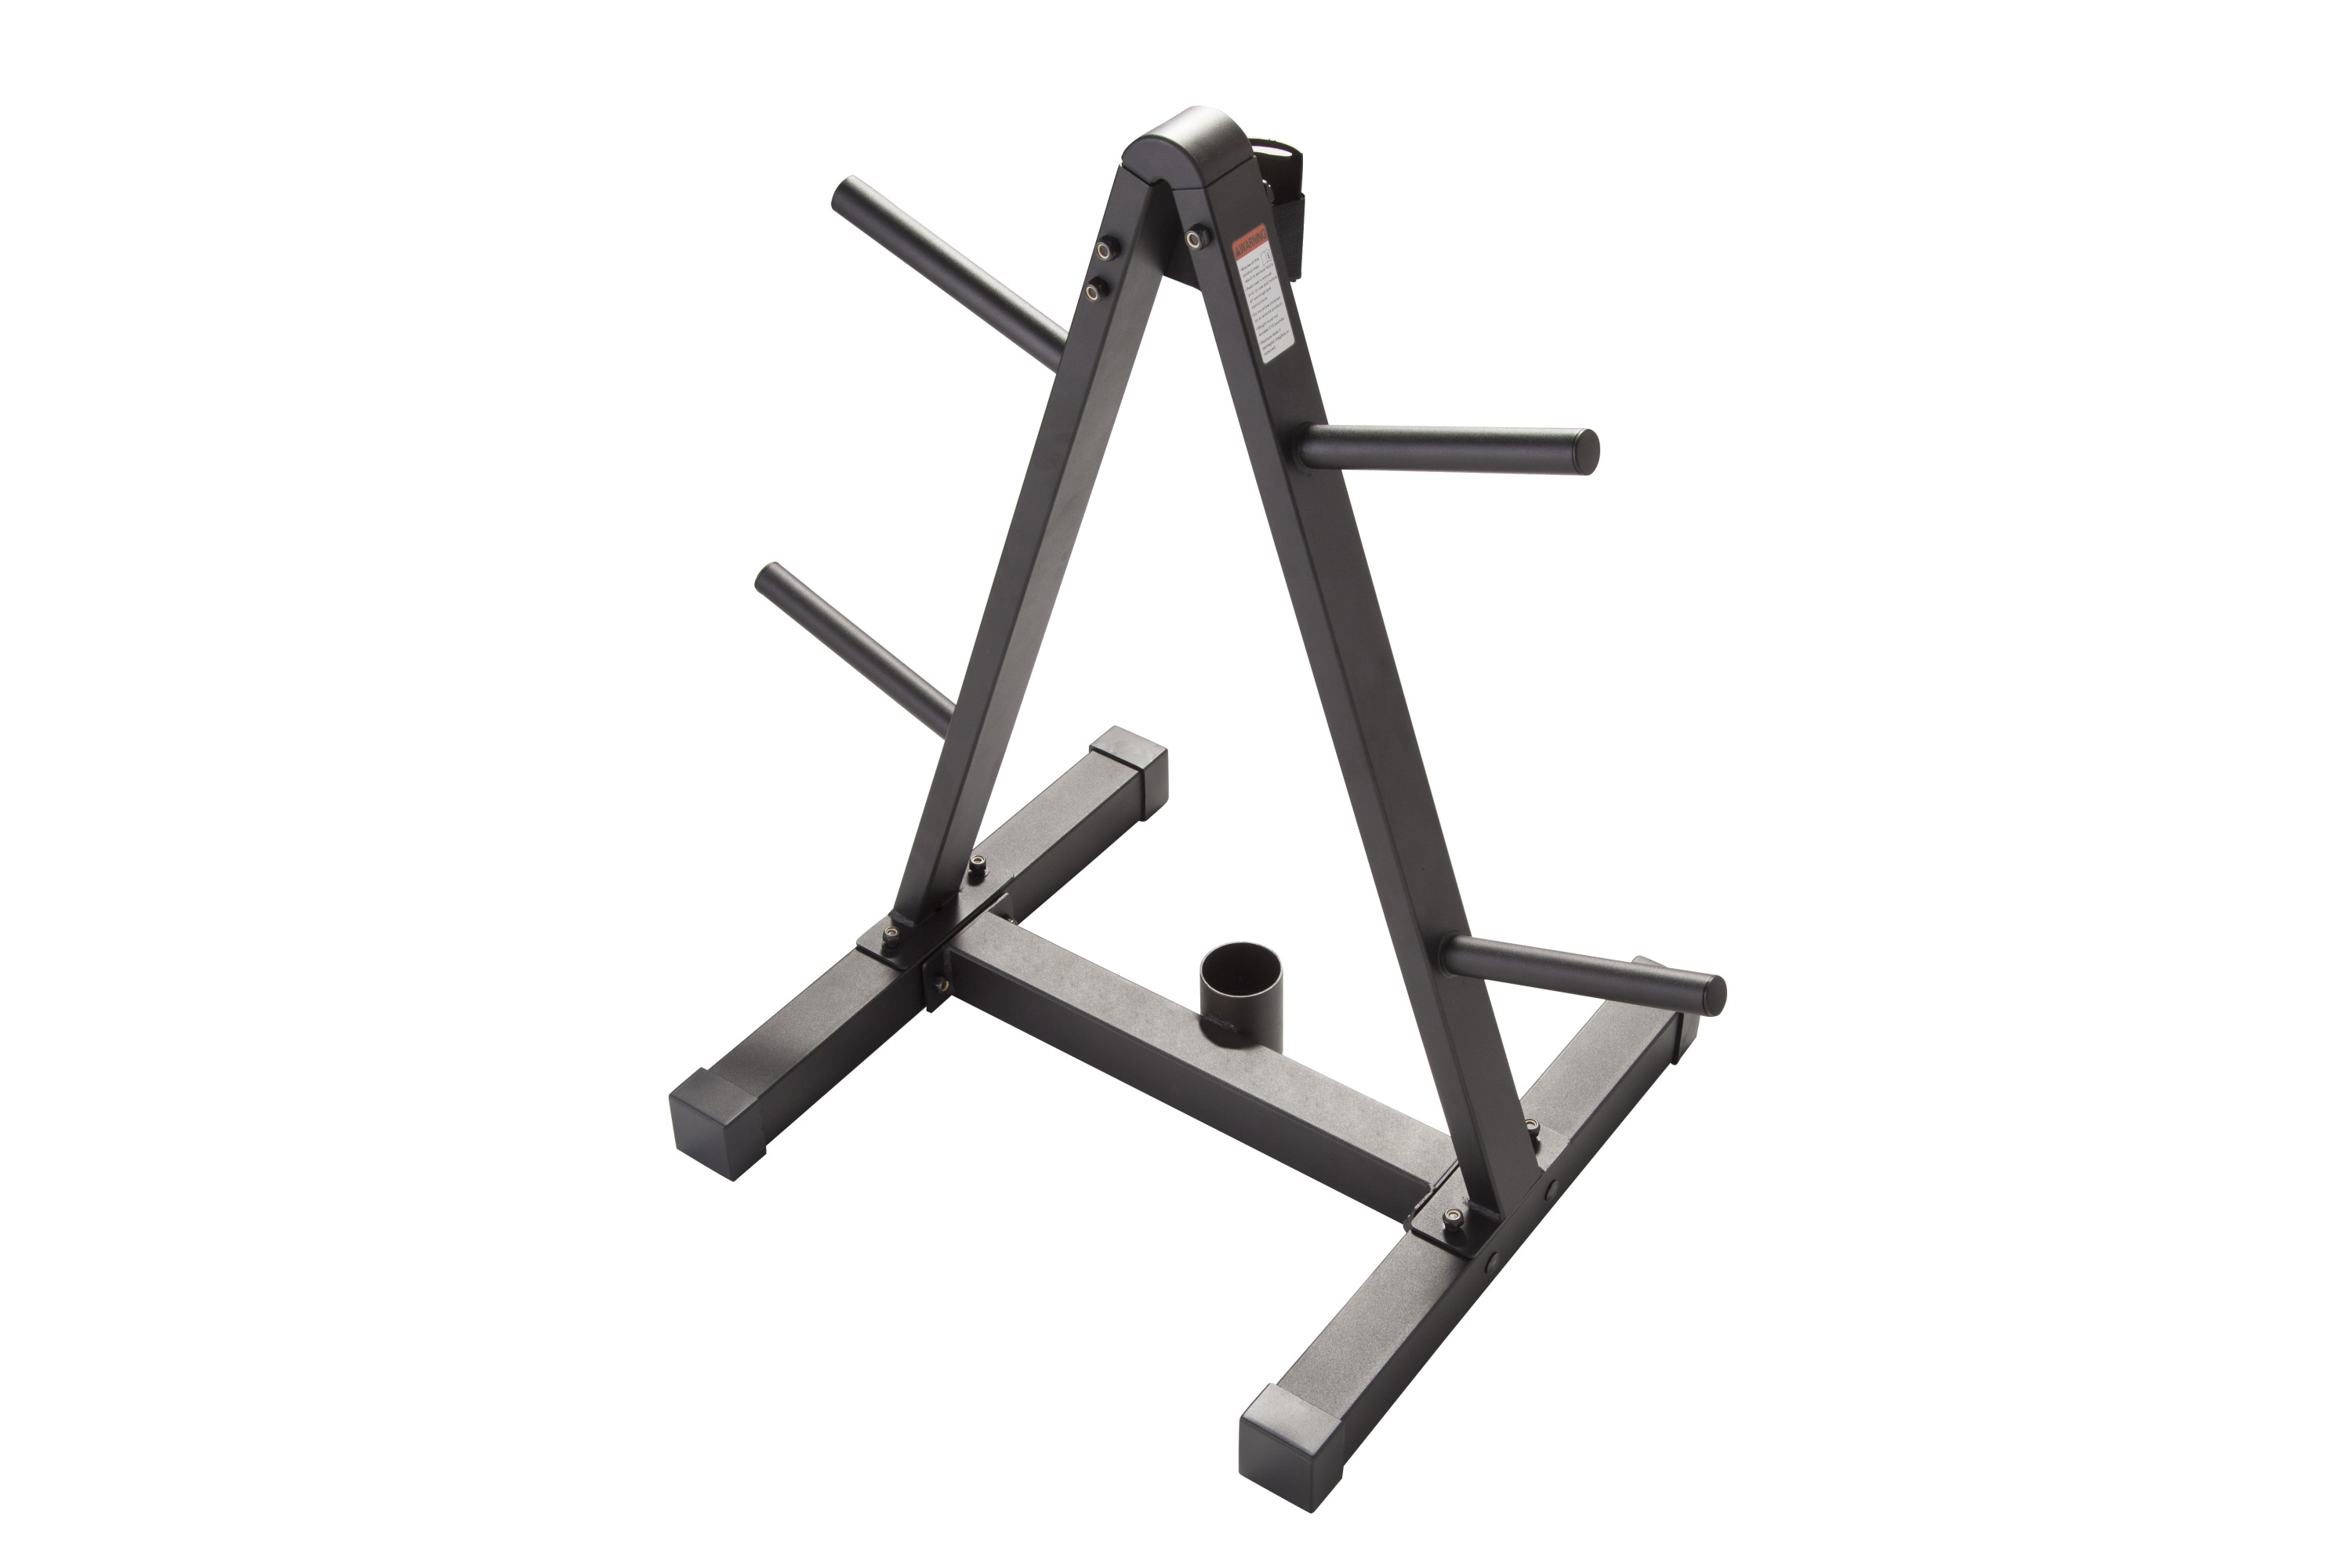 Weider Multi-Use Weight Plate and Barbell Storage Rack - Walmart $33.72